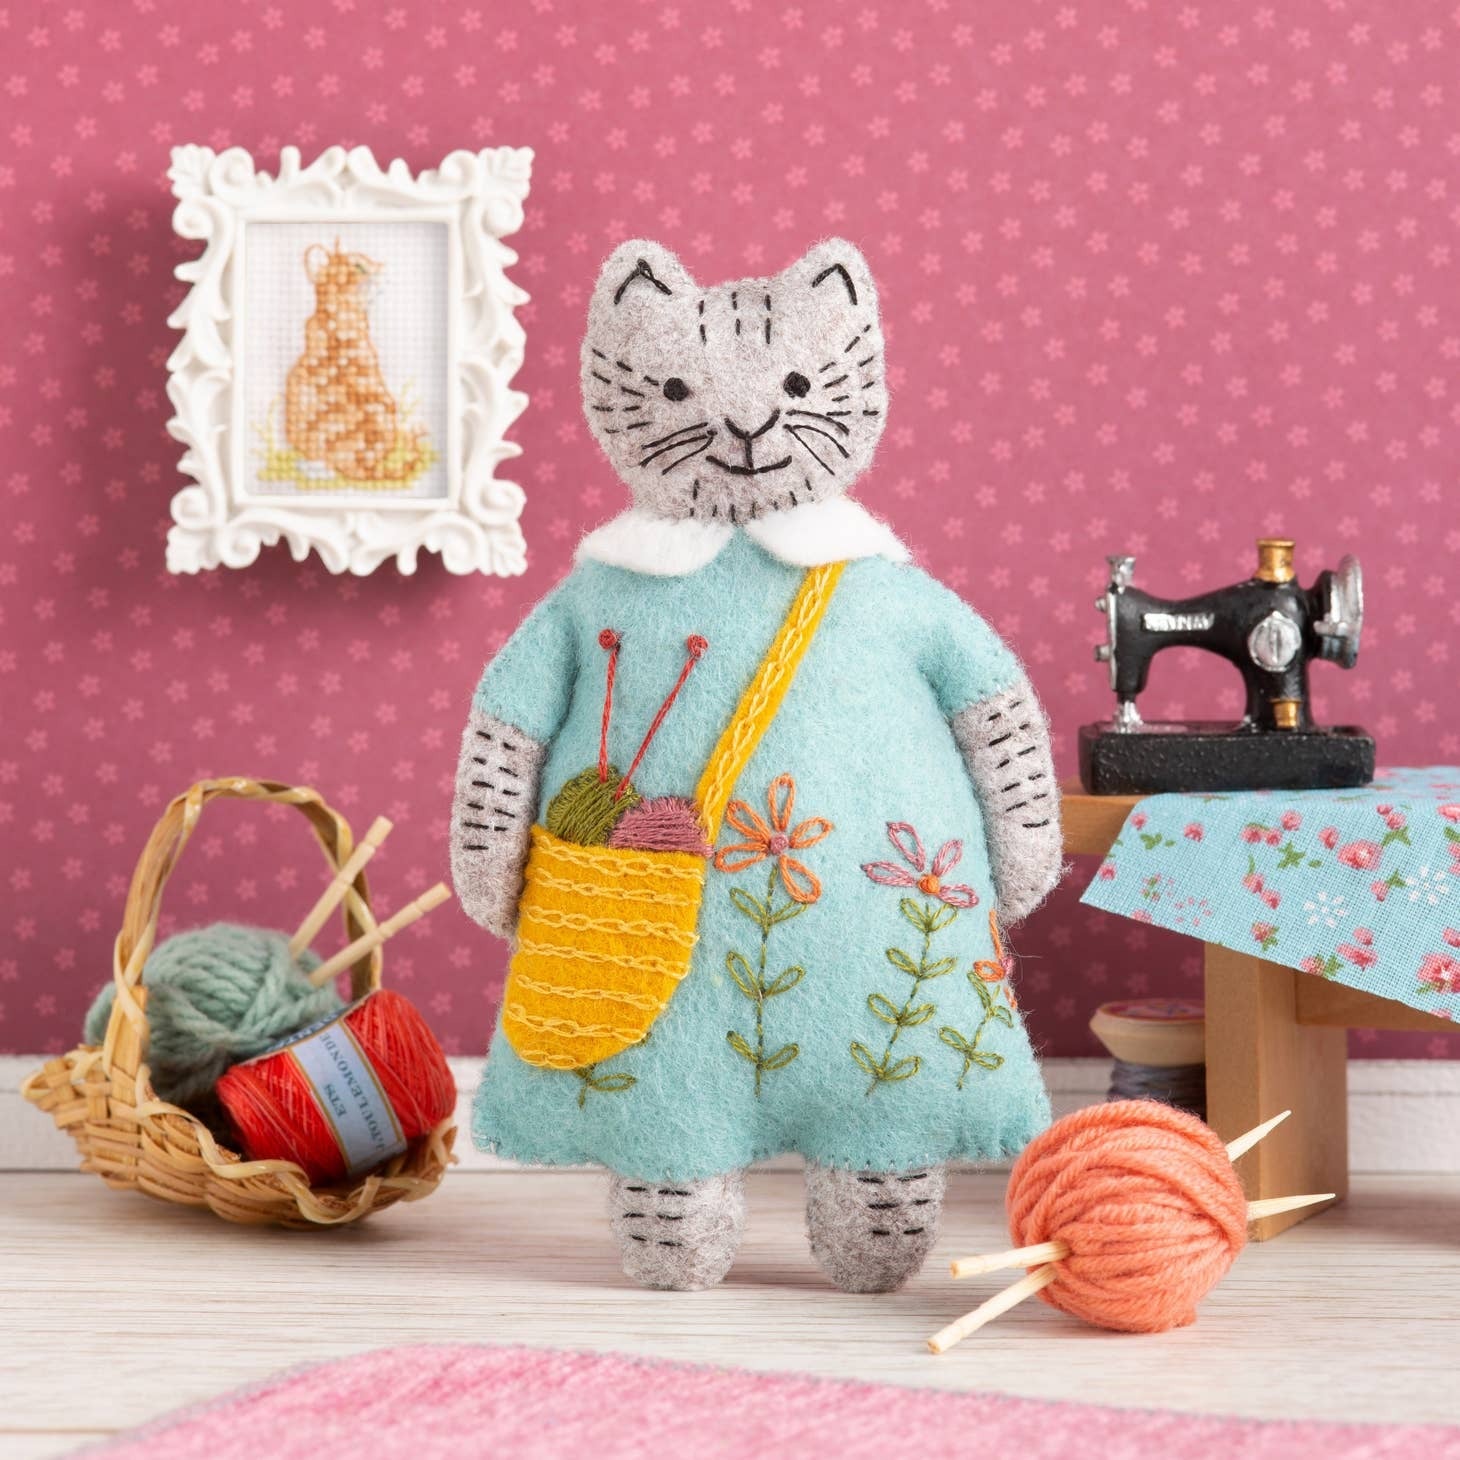 Handcrafted felt cat figure in aqua dress, knitting with vibrant yarn, set against a pink backdrop with miniature sewing accessories and framed cross-stitch artwork.